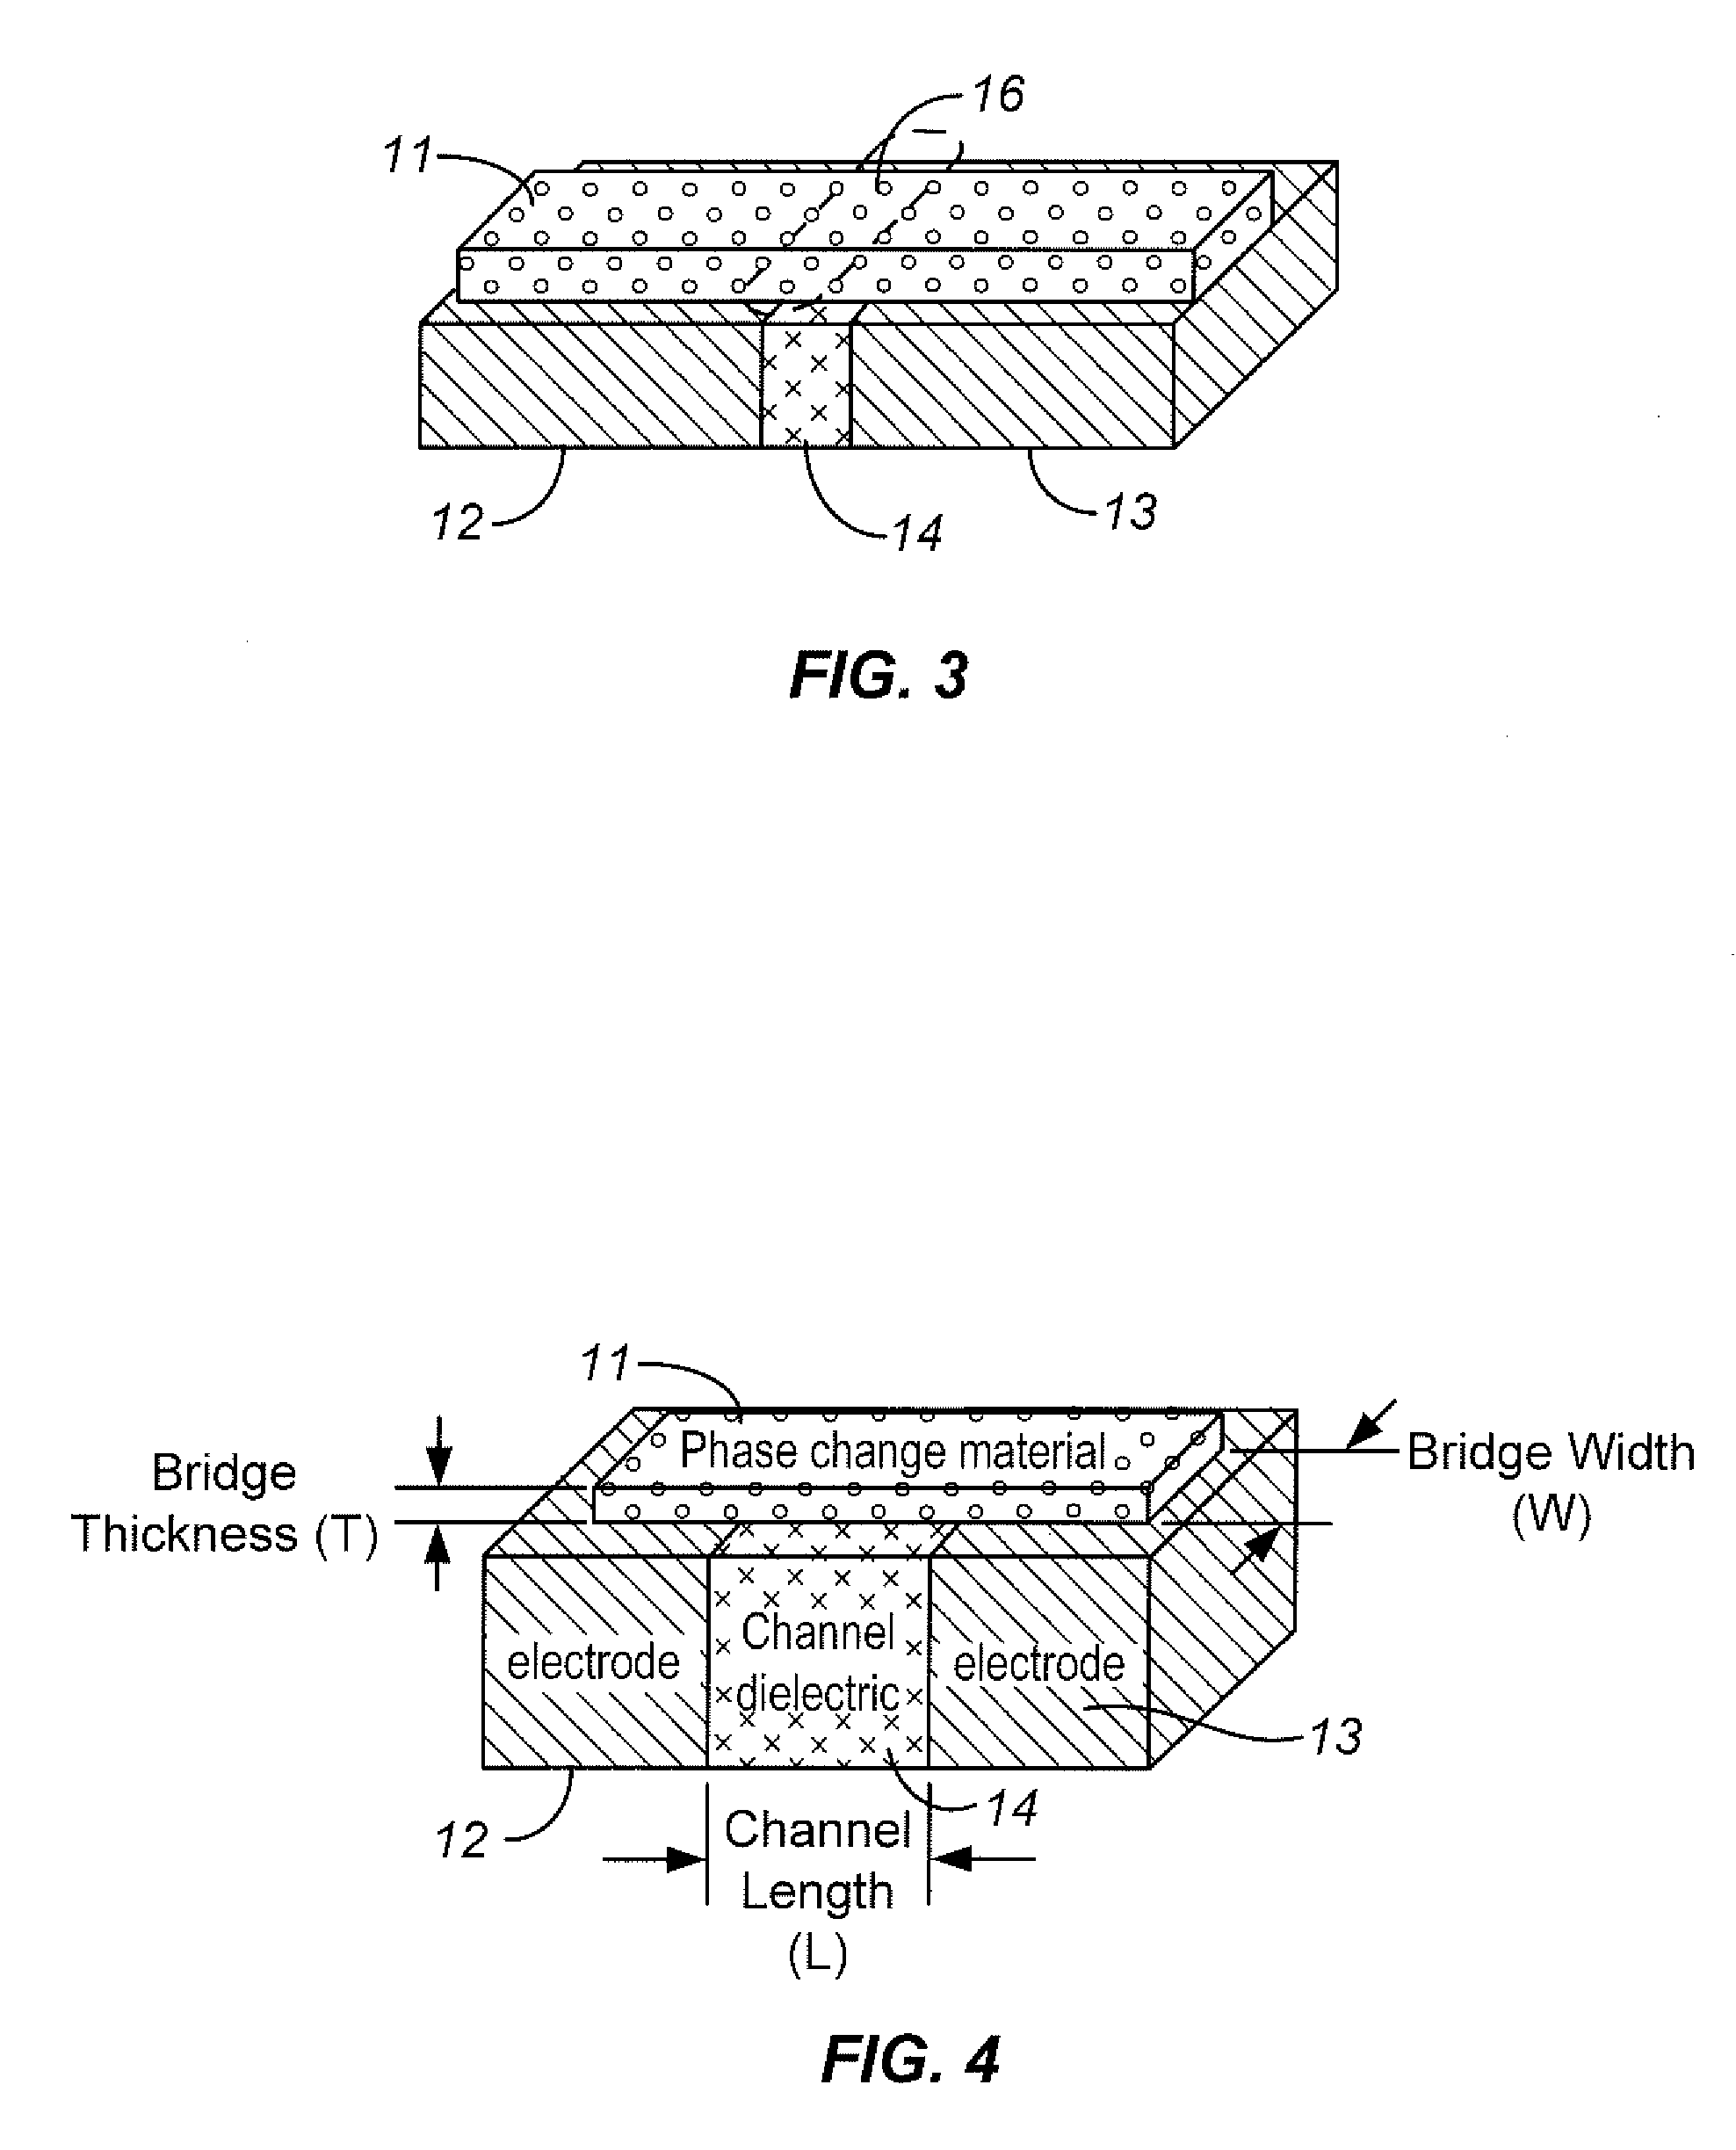 Manufacturing Method for Phase Change RAM with Electrode Layer Process